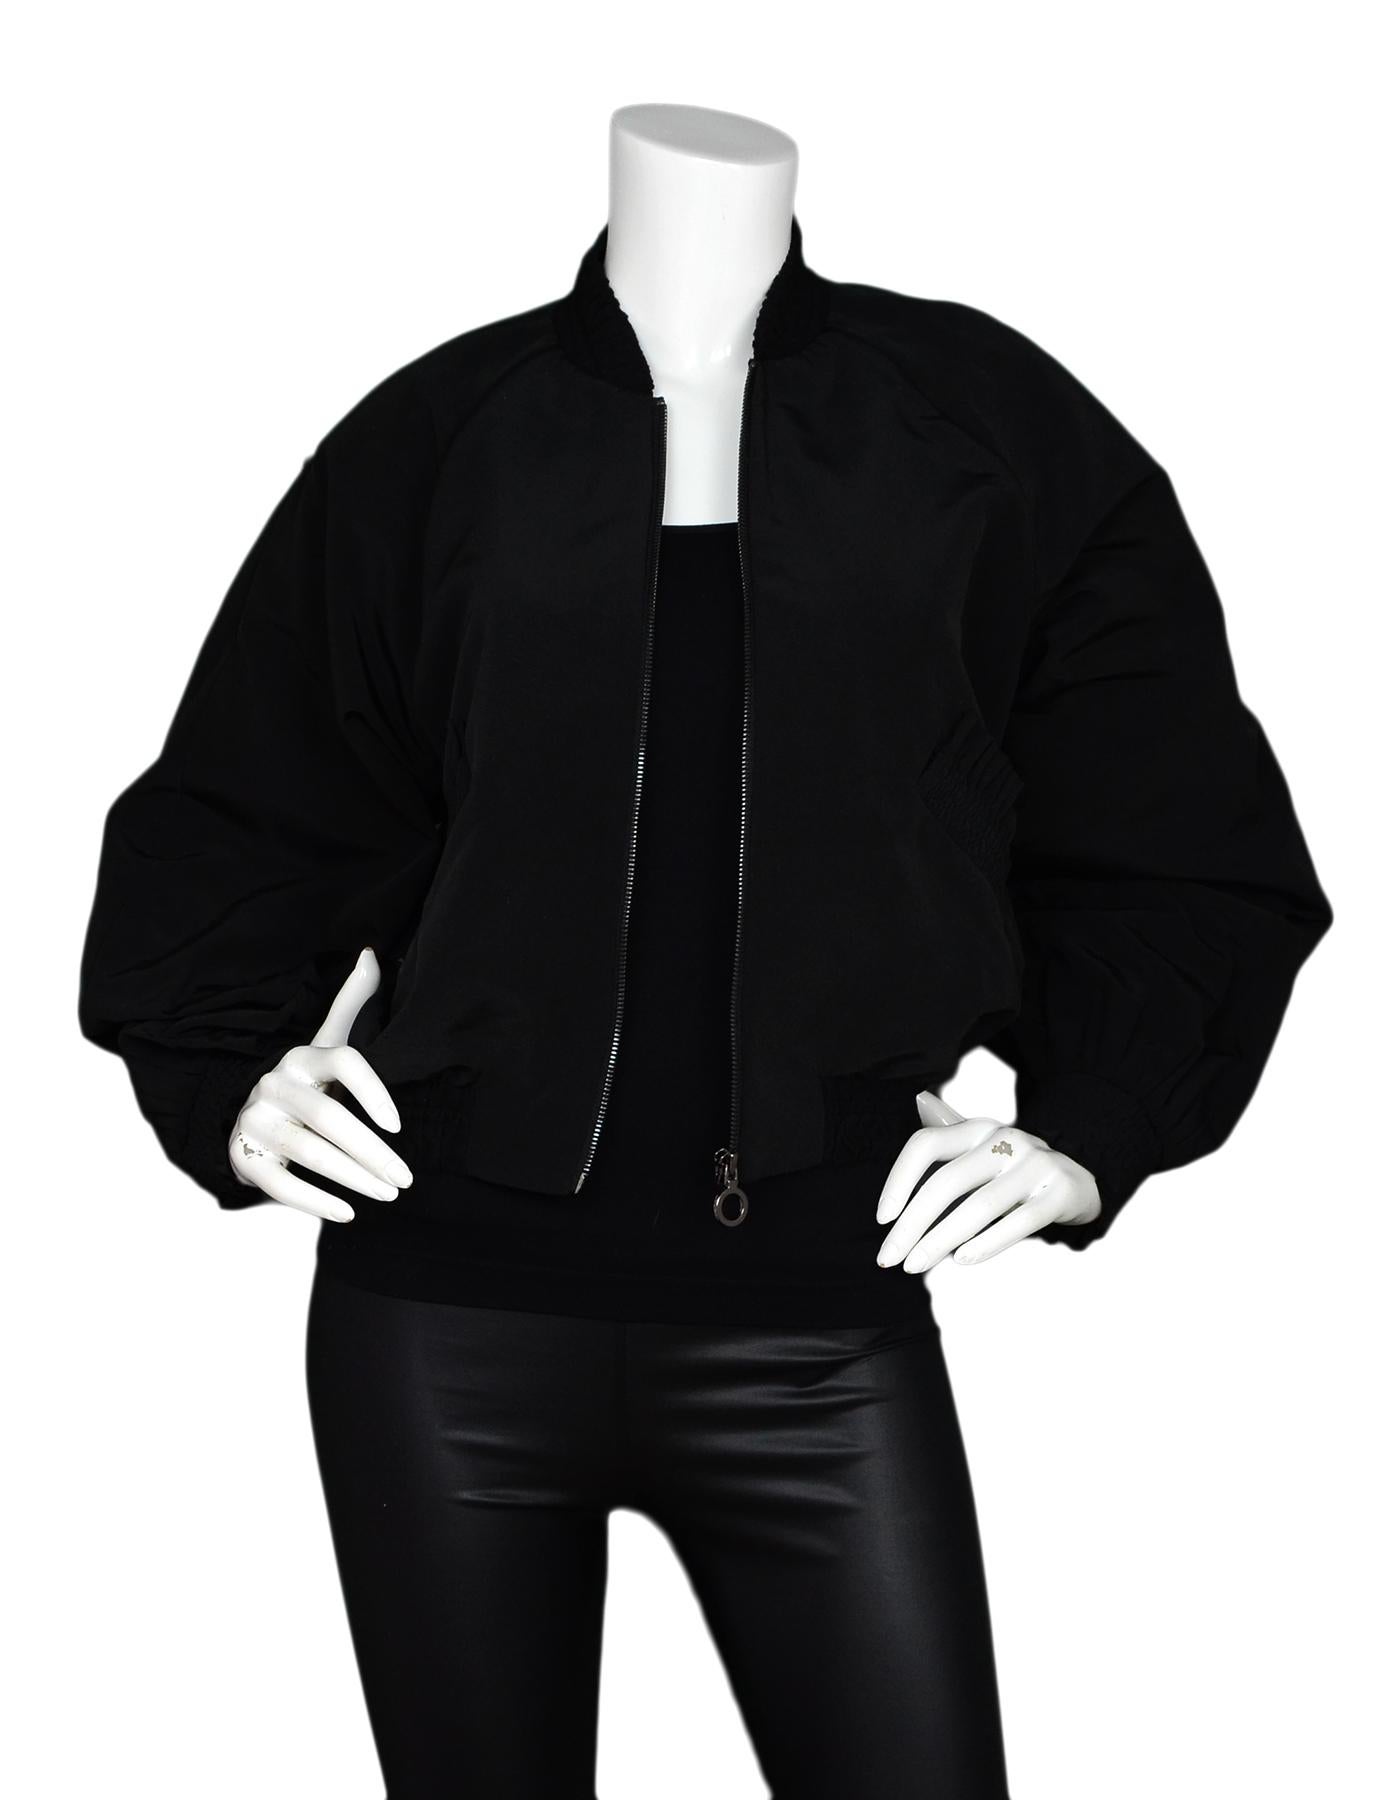 Alexis Black Bomber Jacket W/ Ruffle Pockets Sz S

Made In: China
Color: Black
Materials: 100% polyester
Opening/Closure: Gunmetal front zipper
Overall Condition: Excellent pre-owned condition 

Measurements: 
Shoulder To Shoulder: 20